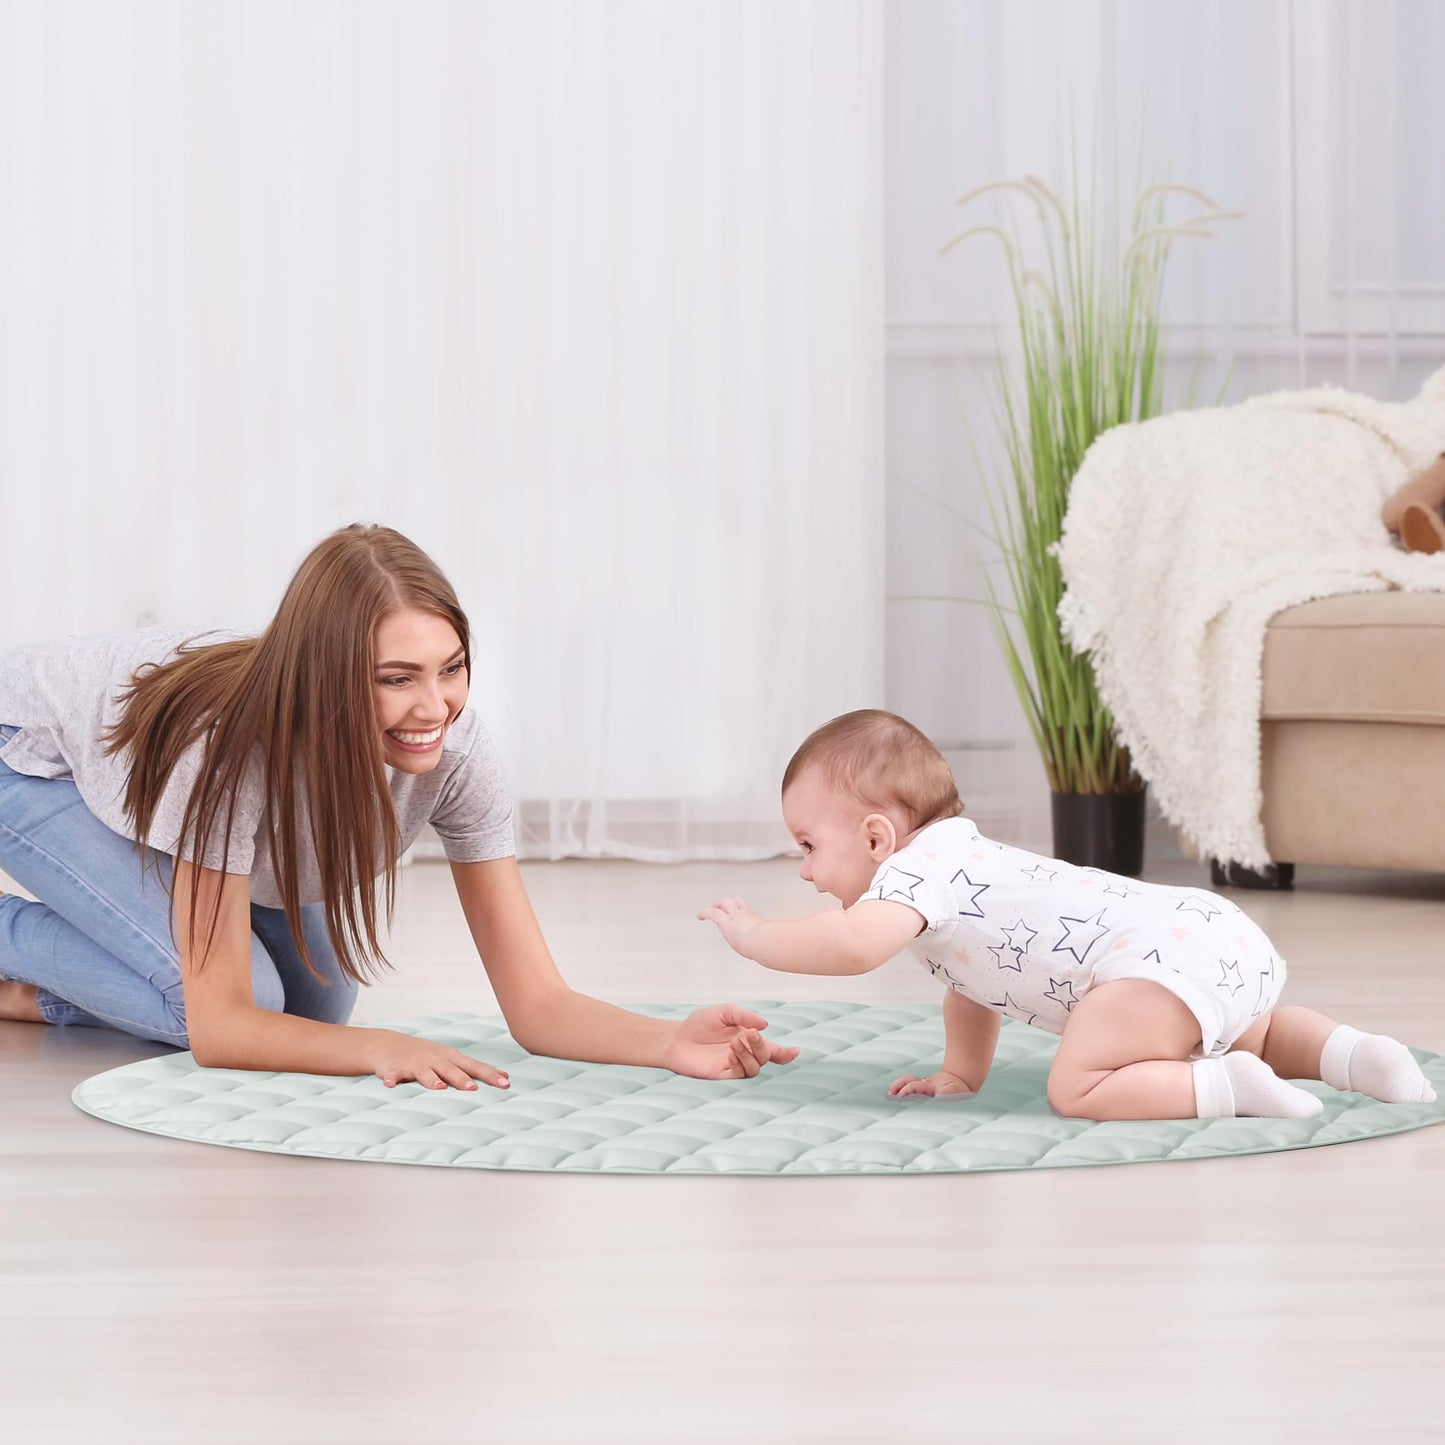 Stylish Baby Play Mat - Soft Cotton Crawling Mat Creates a Great Play Gym Area for Your Baby Boy or Girl - The Perfect Foldable Tummy Time Floor Playmat That Fits Nicely with Any Kids Playroom Decor